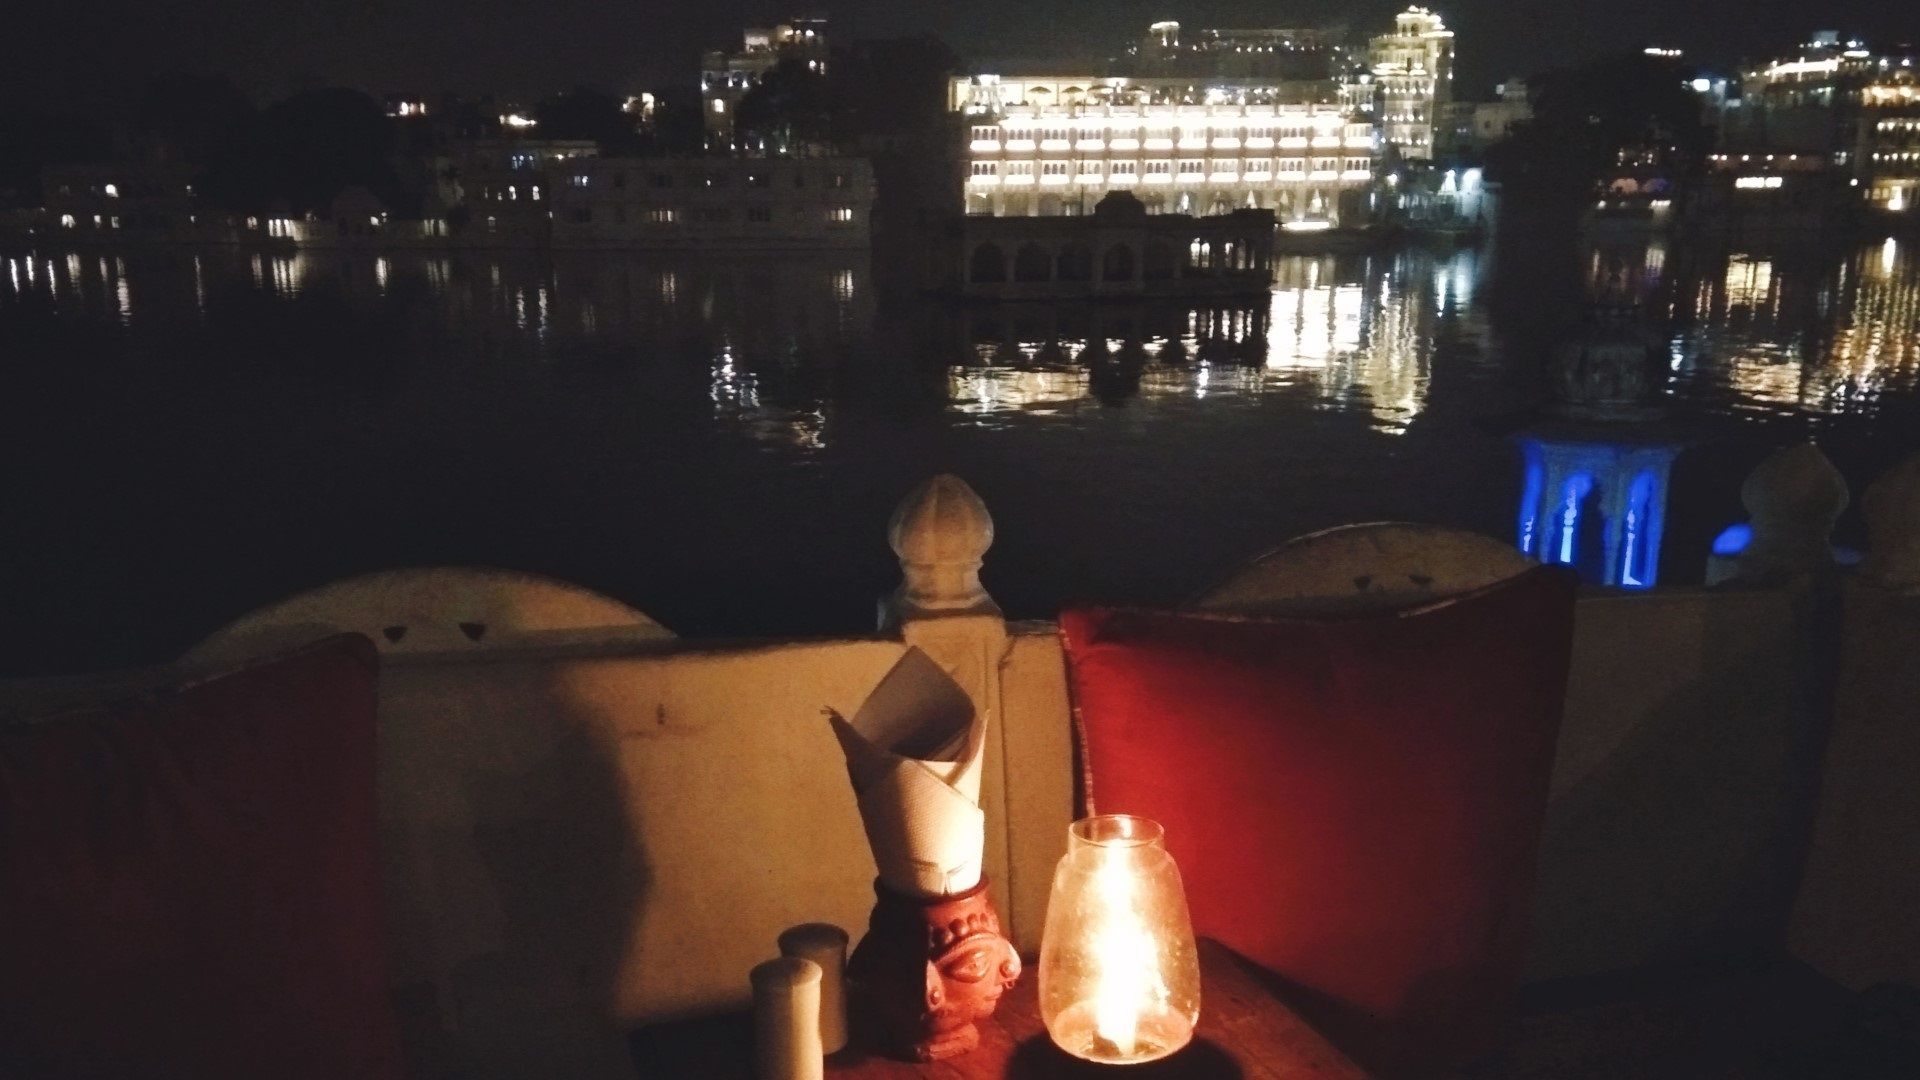 Evening in Udaipur - tourist attractions